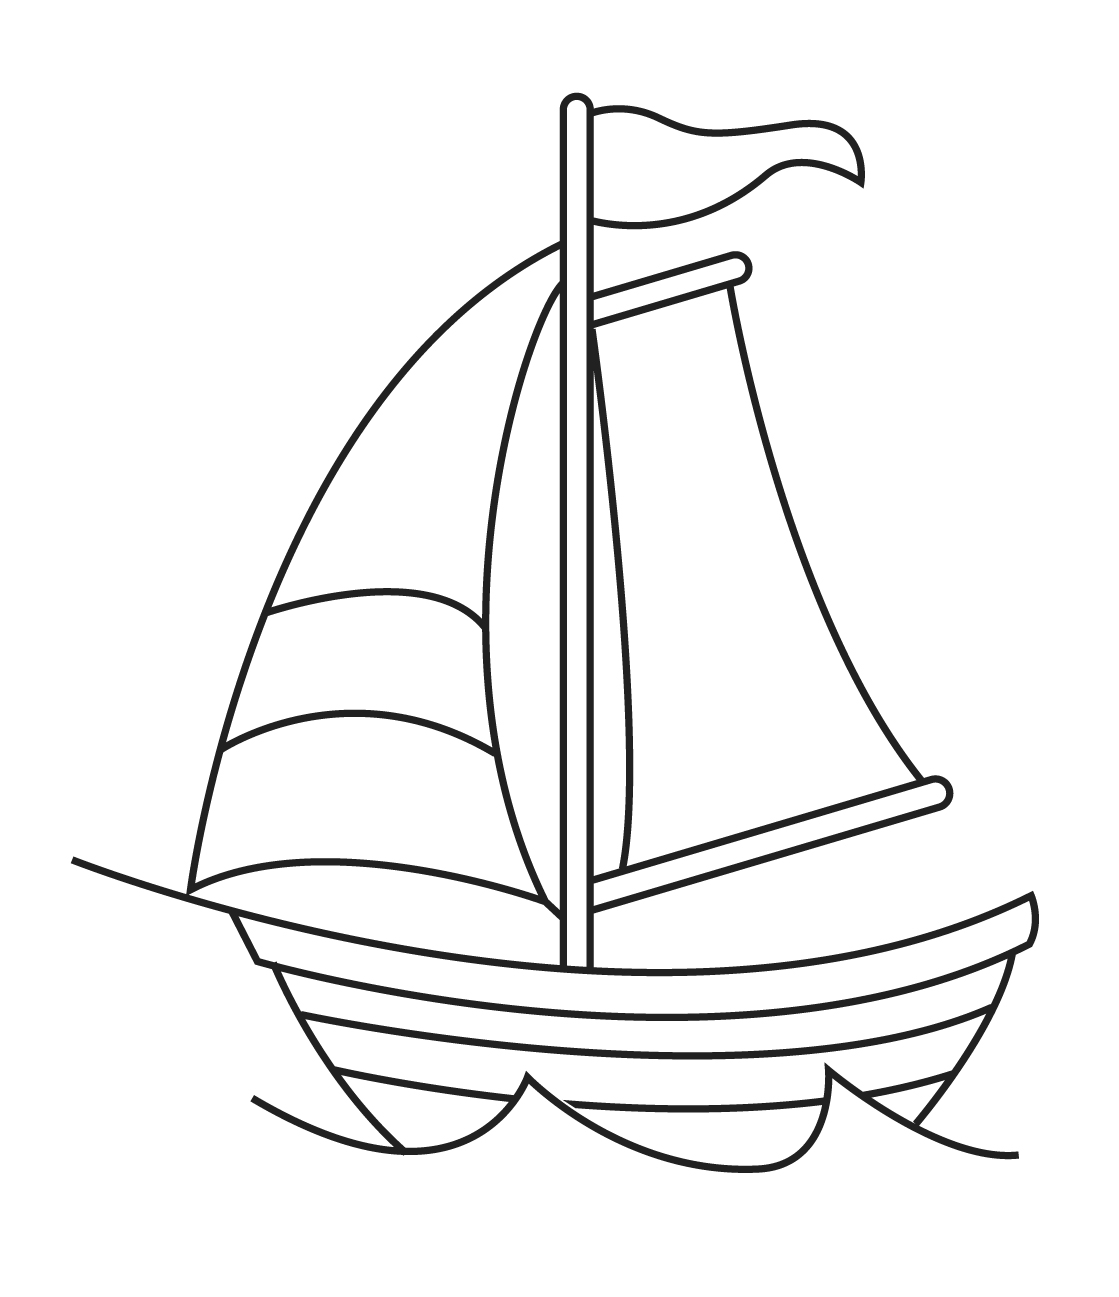 Boat Template For Cake Ideas and Designs